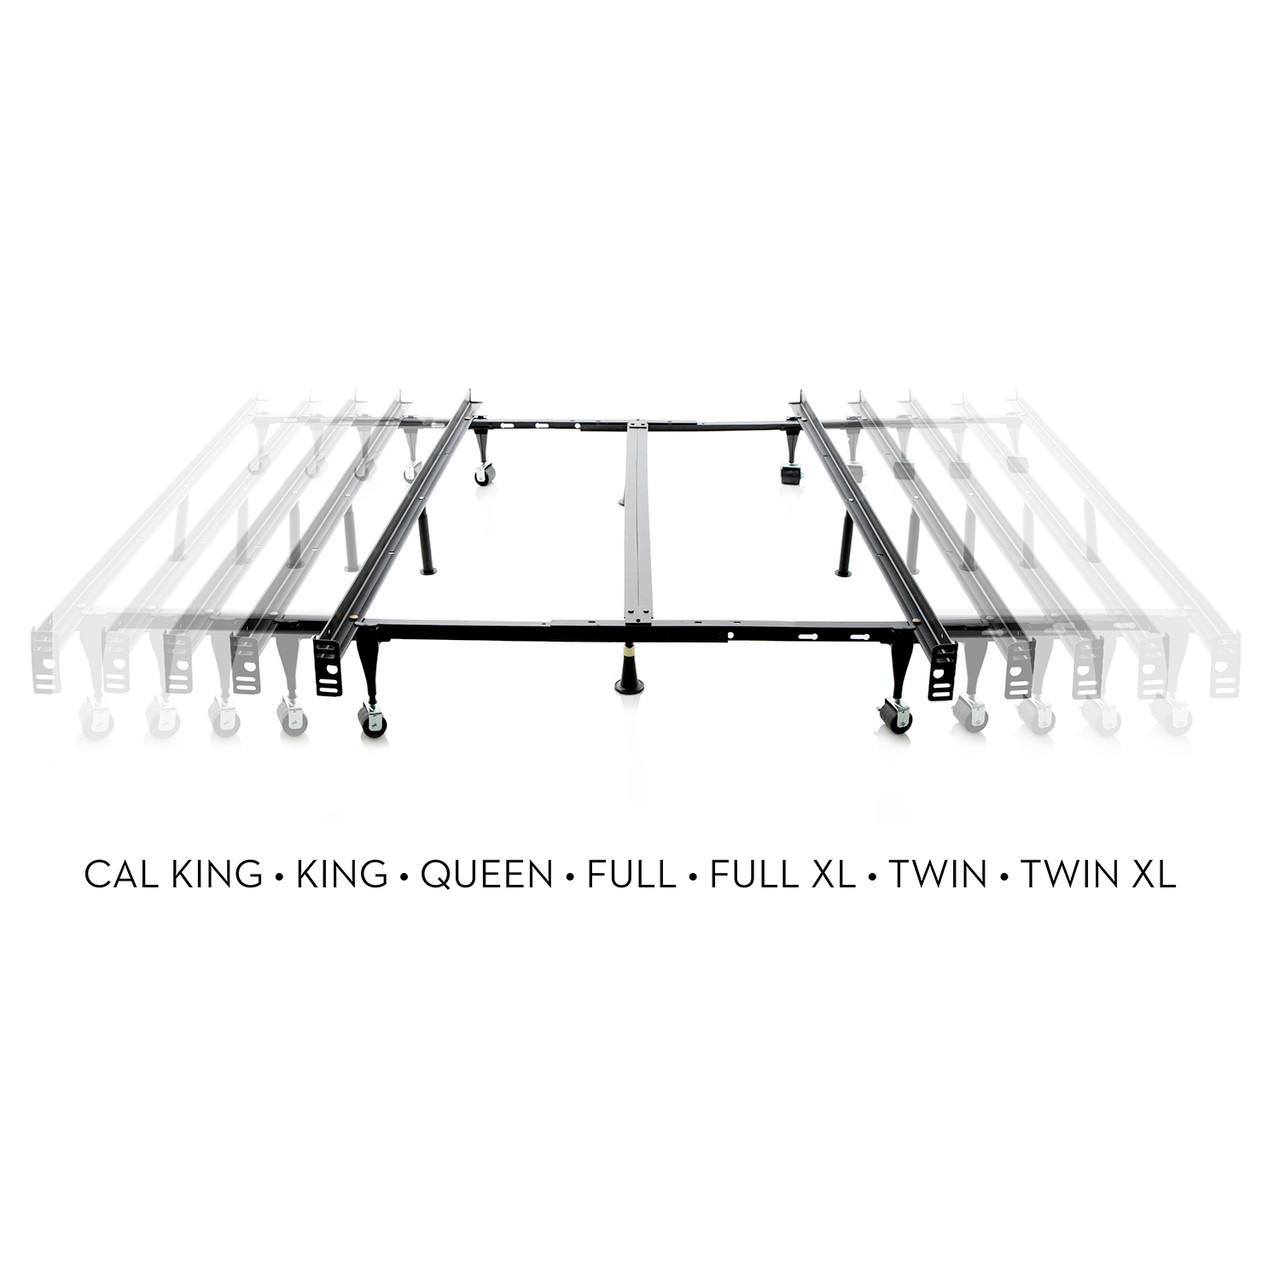 Malouf 8" Universal Steel Bed Frame With Rollers, Expansion View Showing Various Sizes